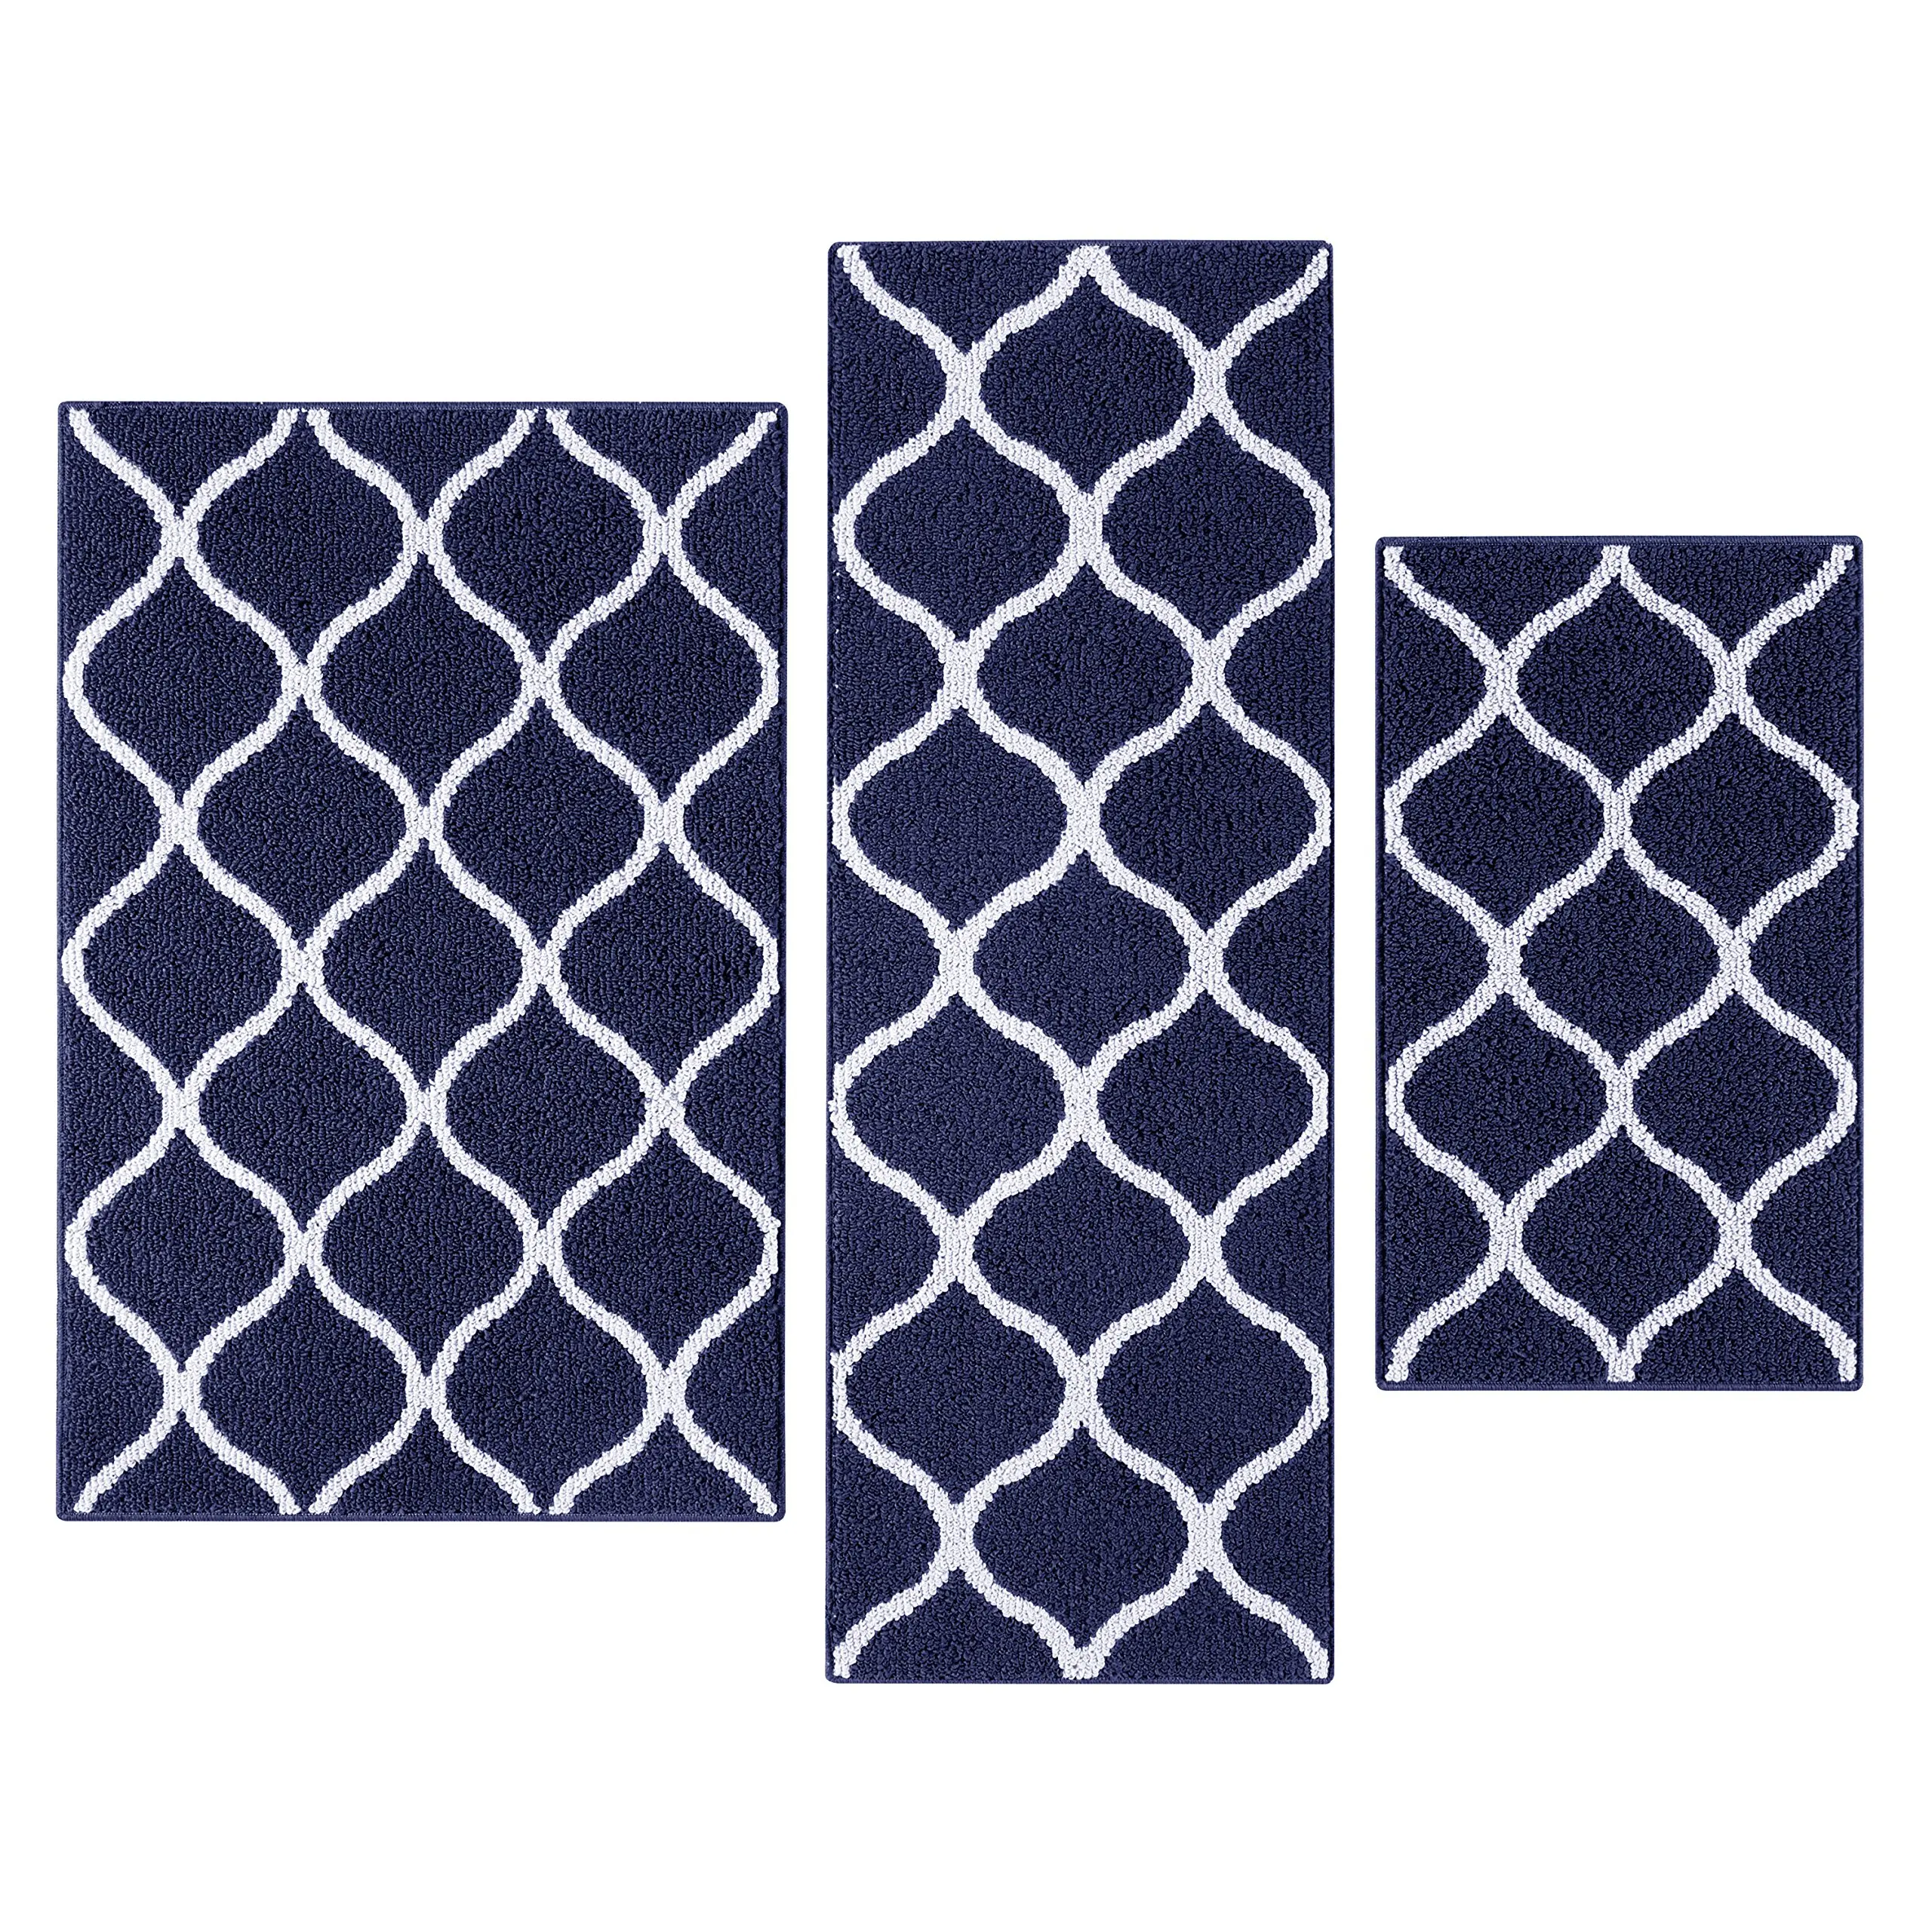 Cheap Rugs Blue And White